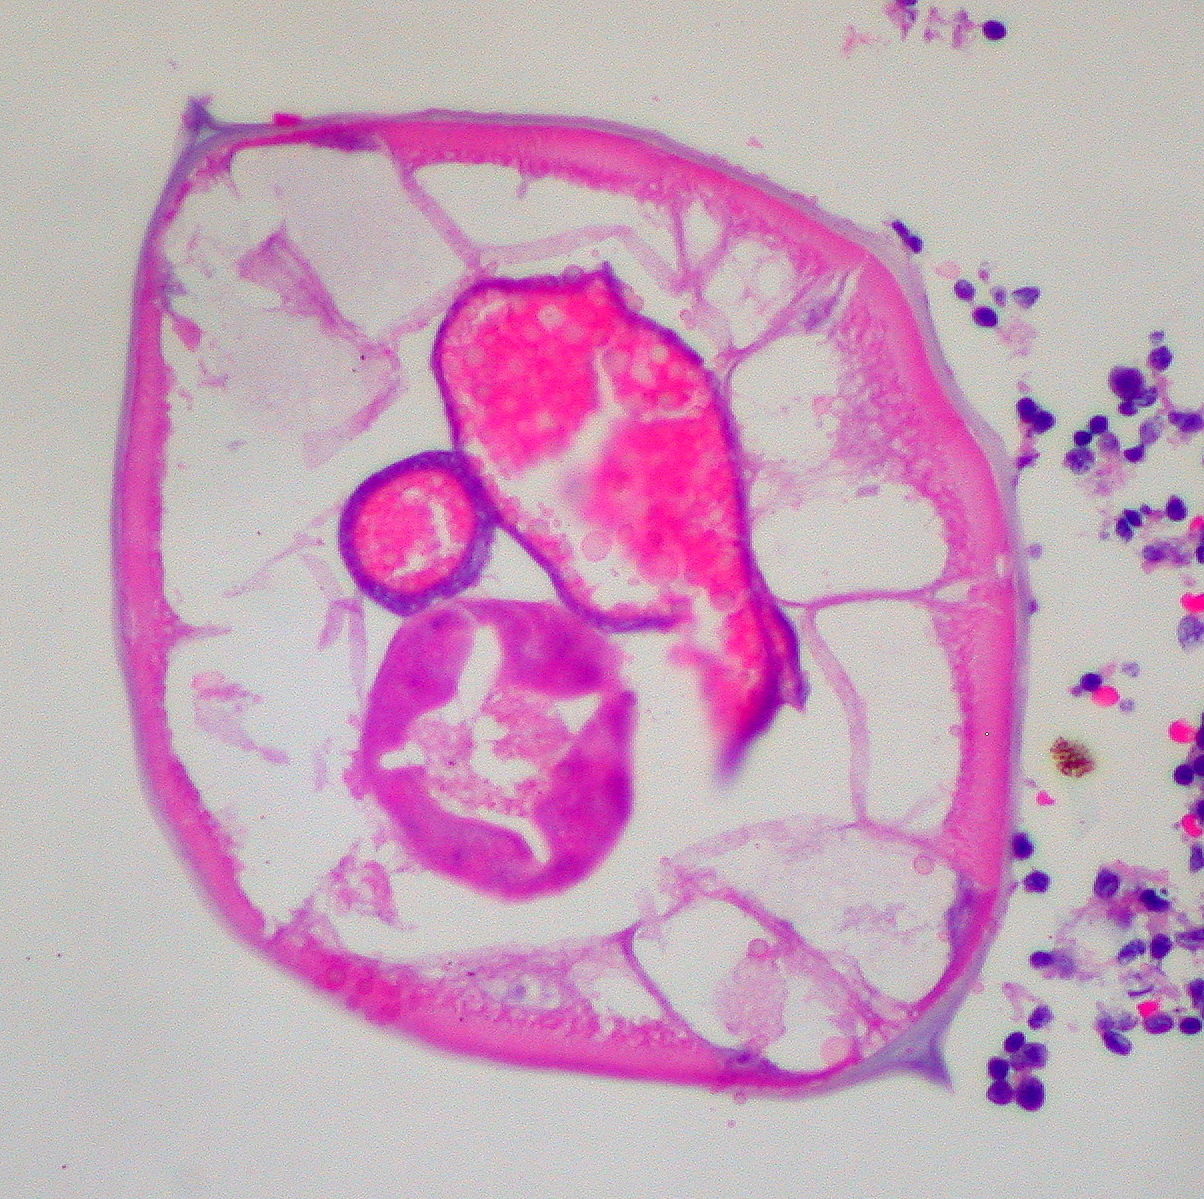 High magnification micrograph of a pinworm in cross-section in the appendix. H&E stain.